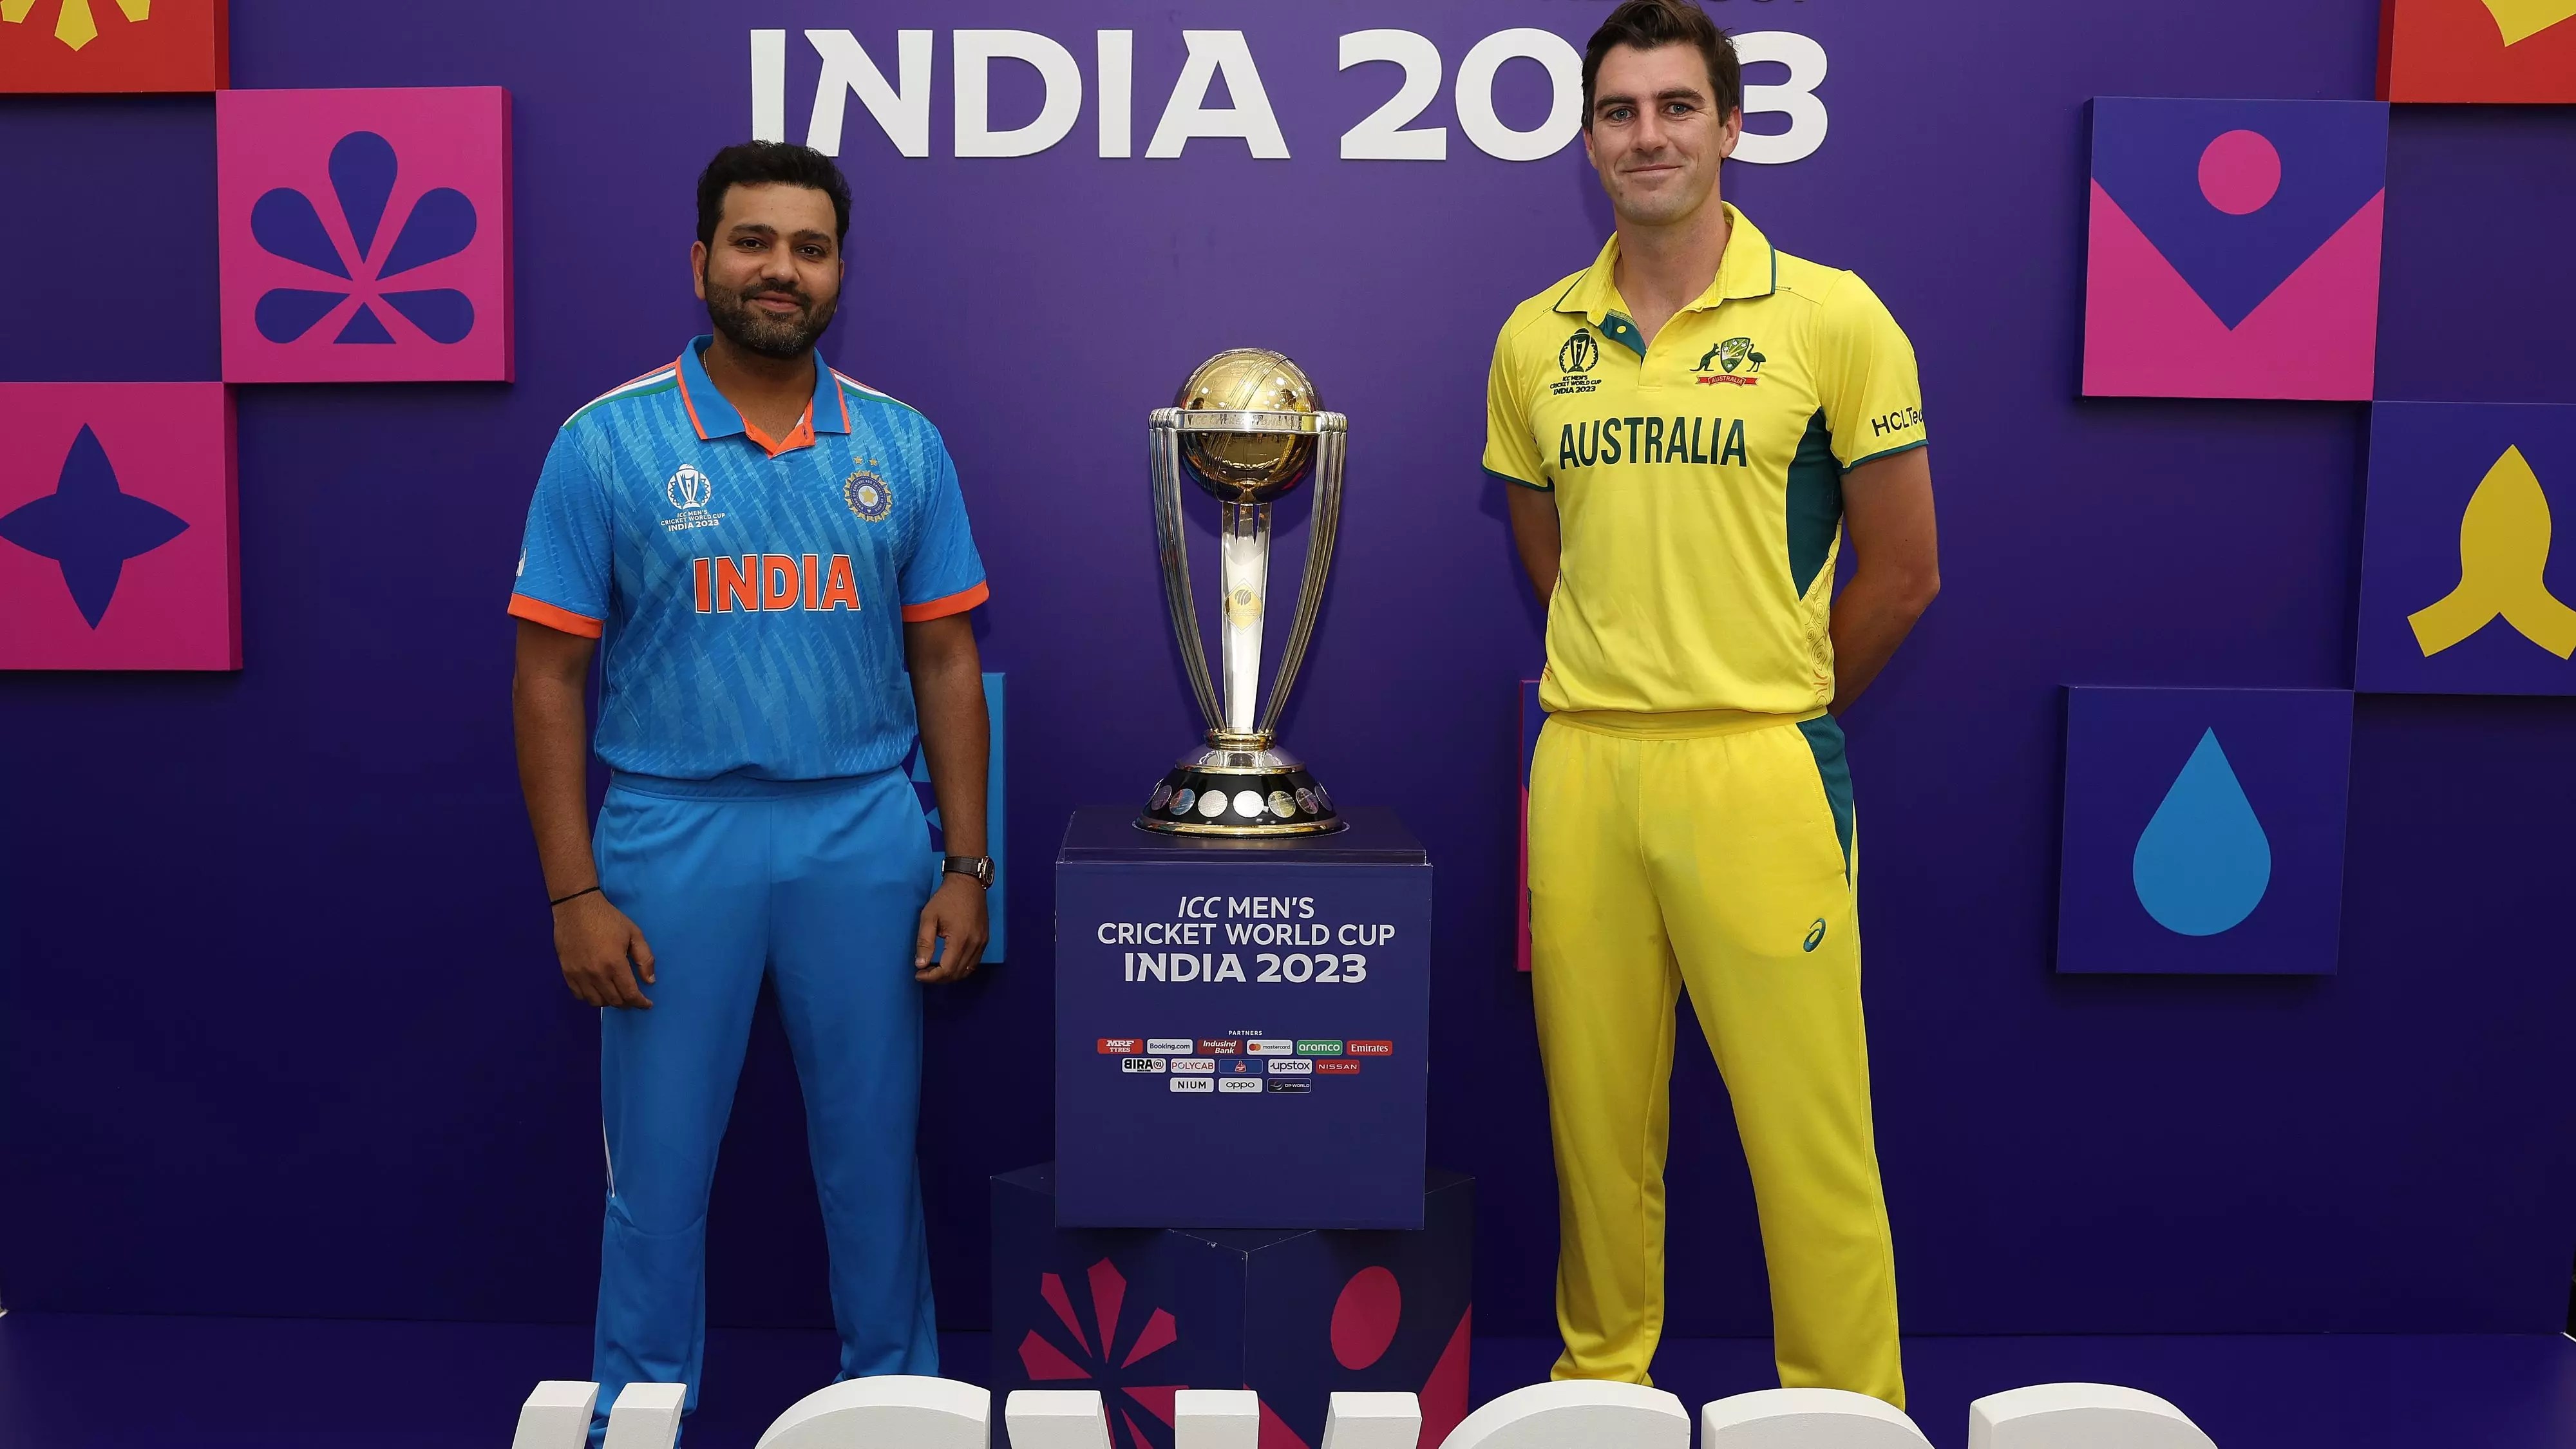 Watch the IND vs AUS Final in the World Cup 2023 live without any cost. Check how and where to catch the action.